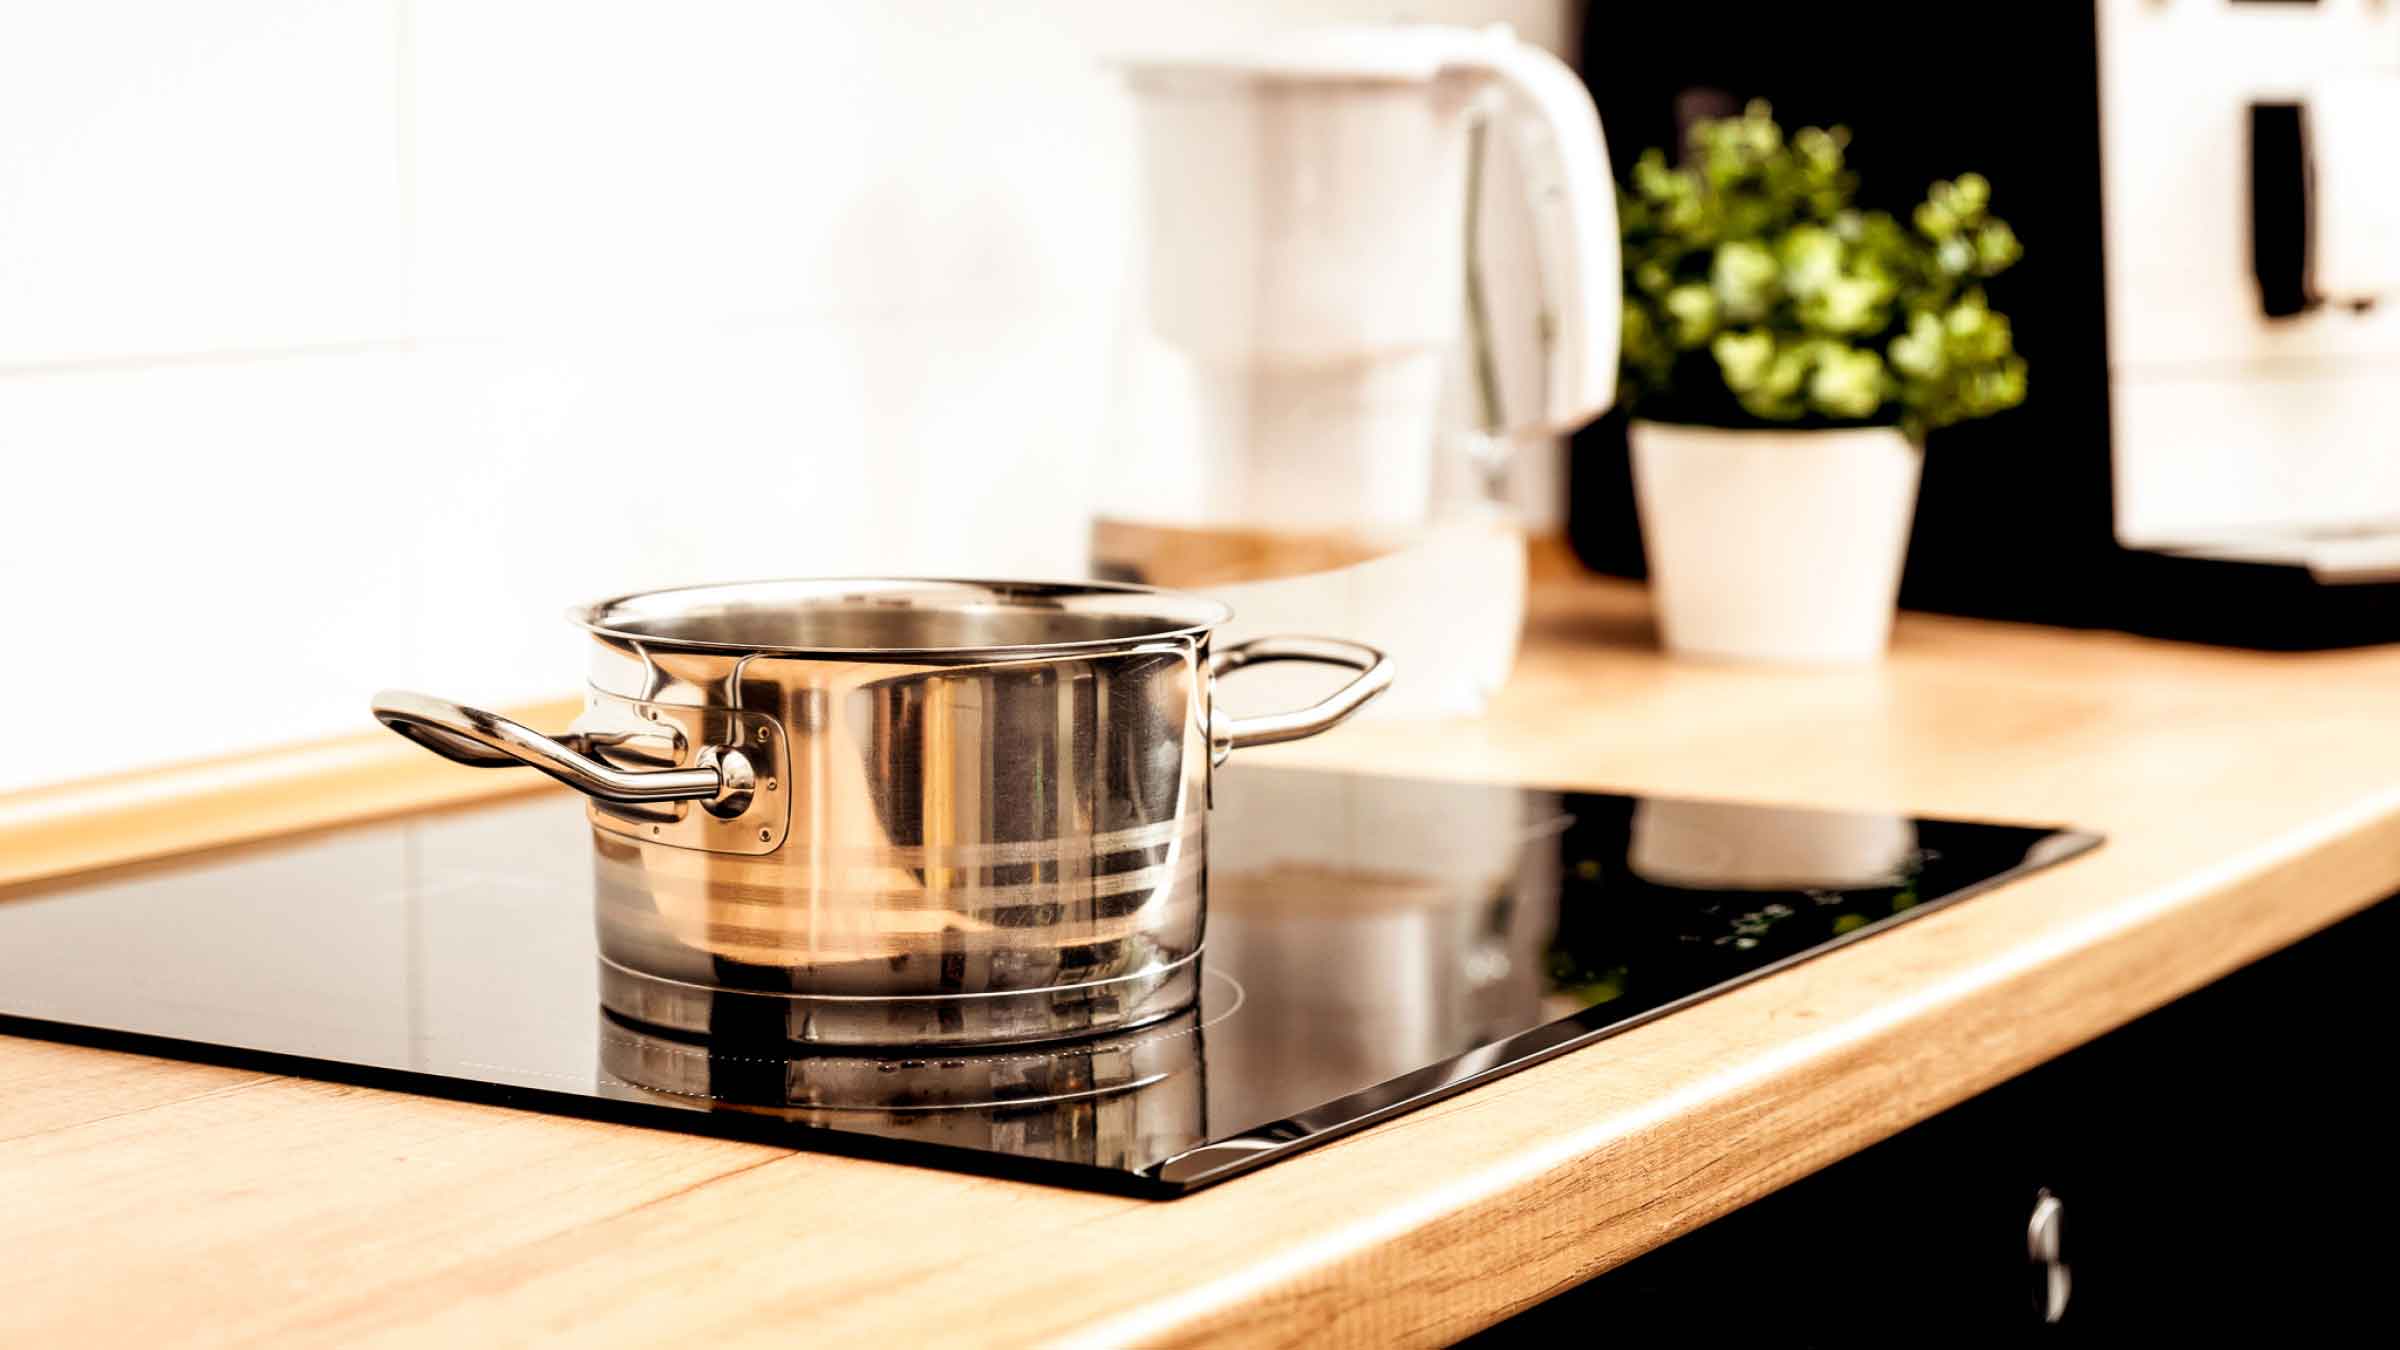 Wooden kitchen counter top, with a black electric stovetop and a silver pot sitting on top.